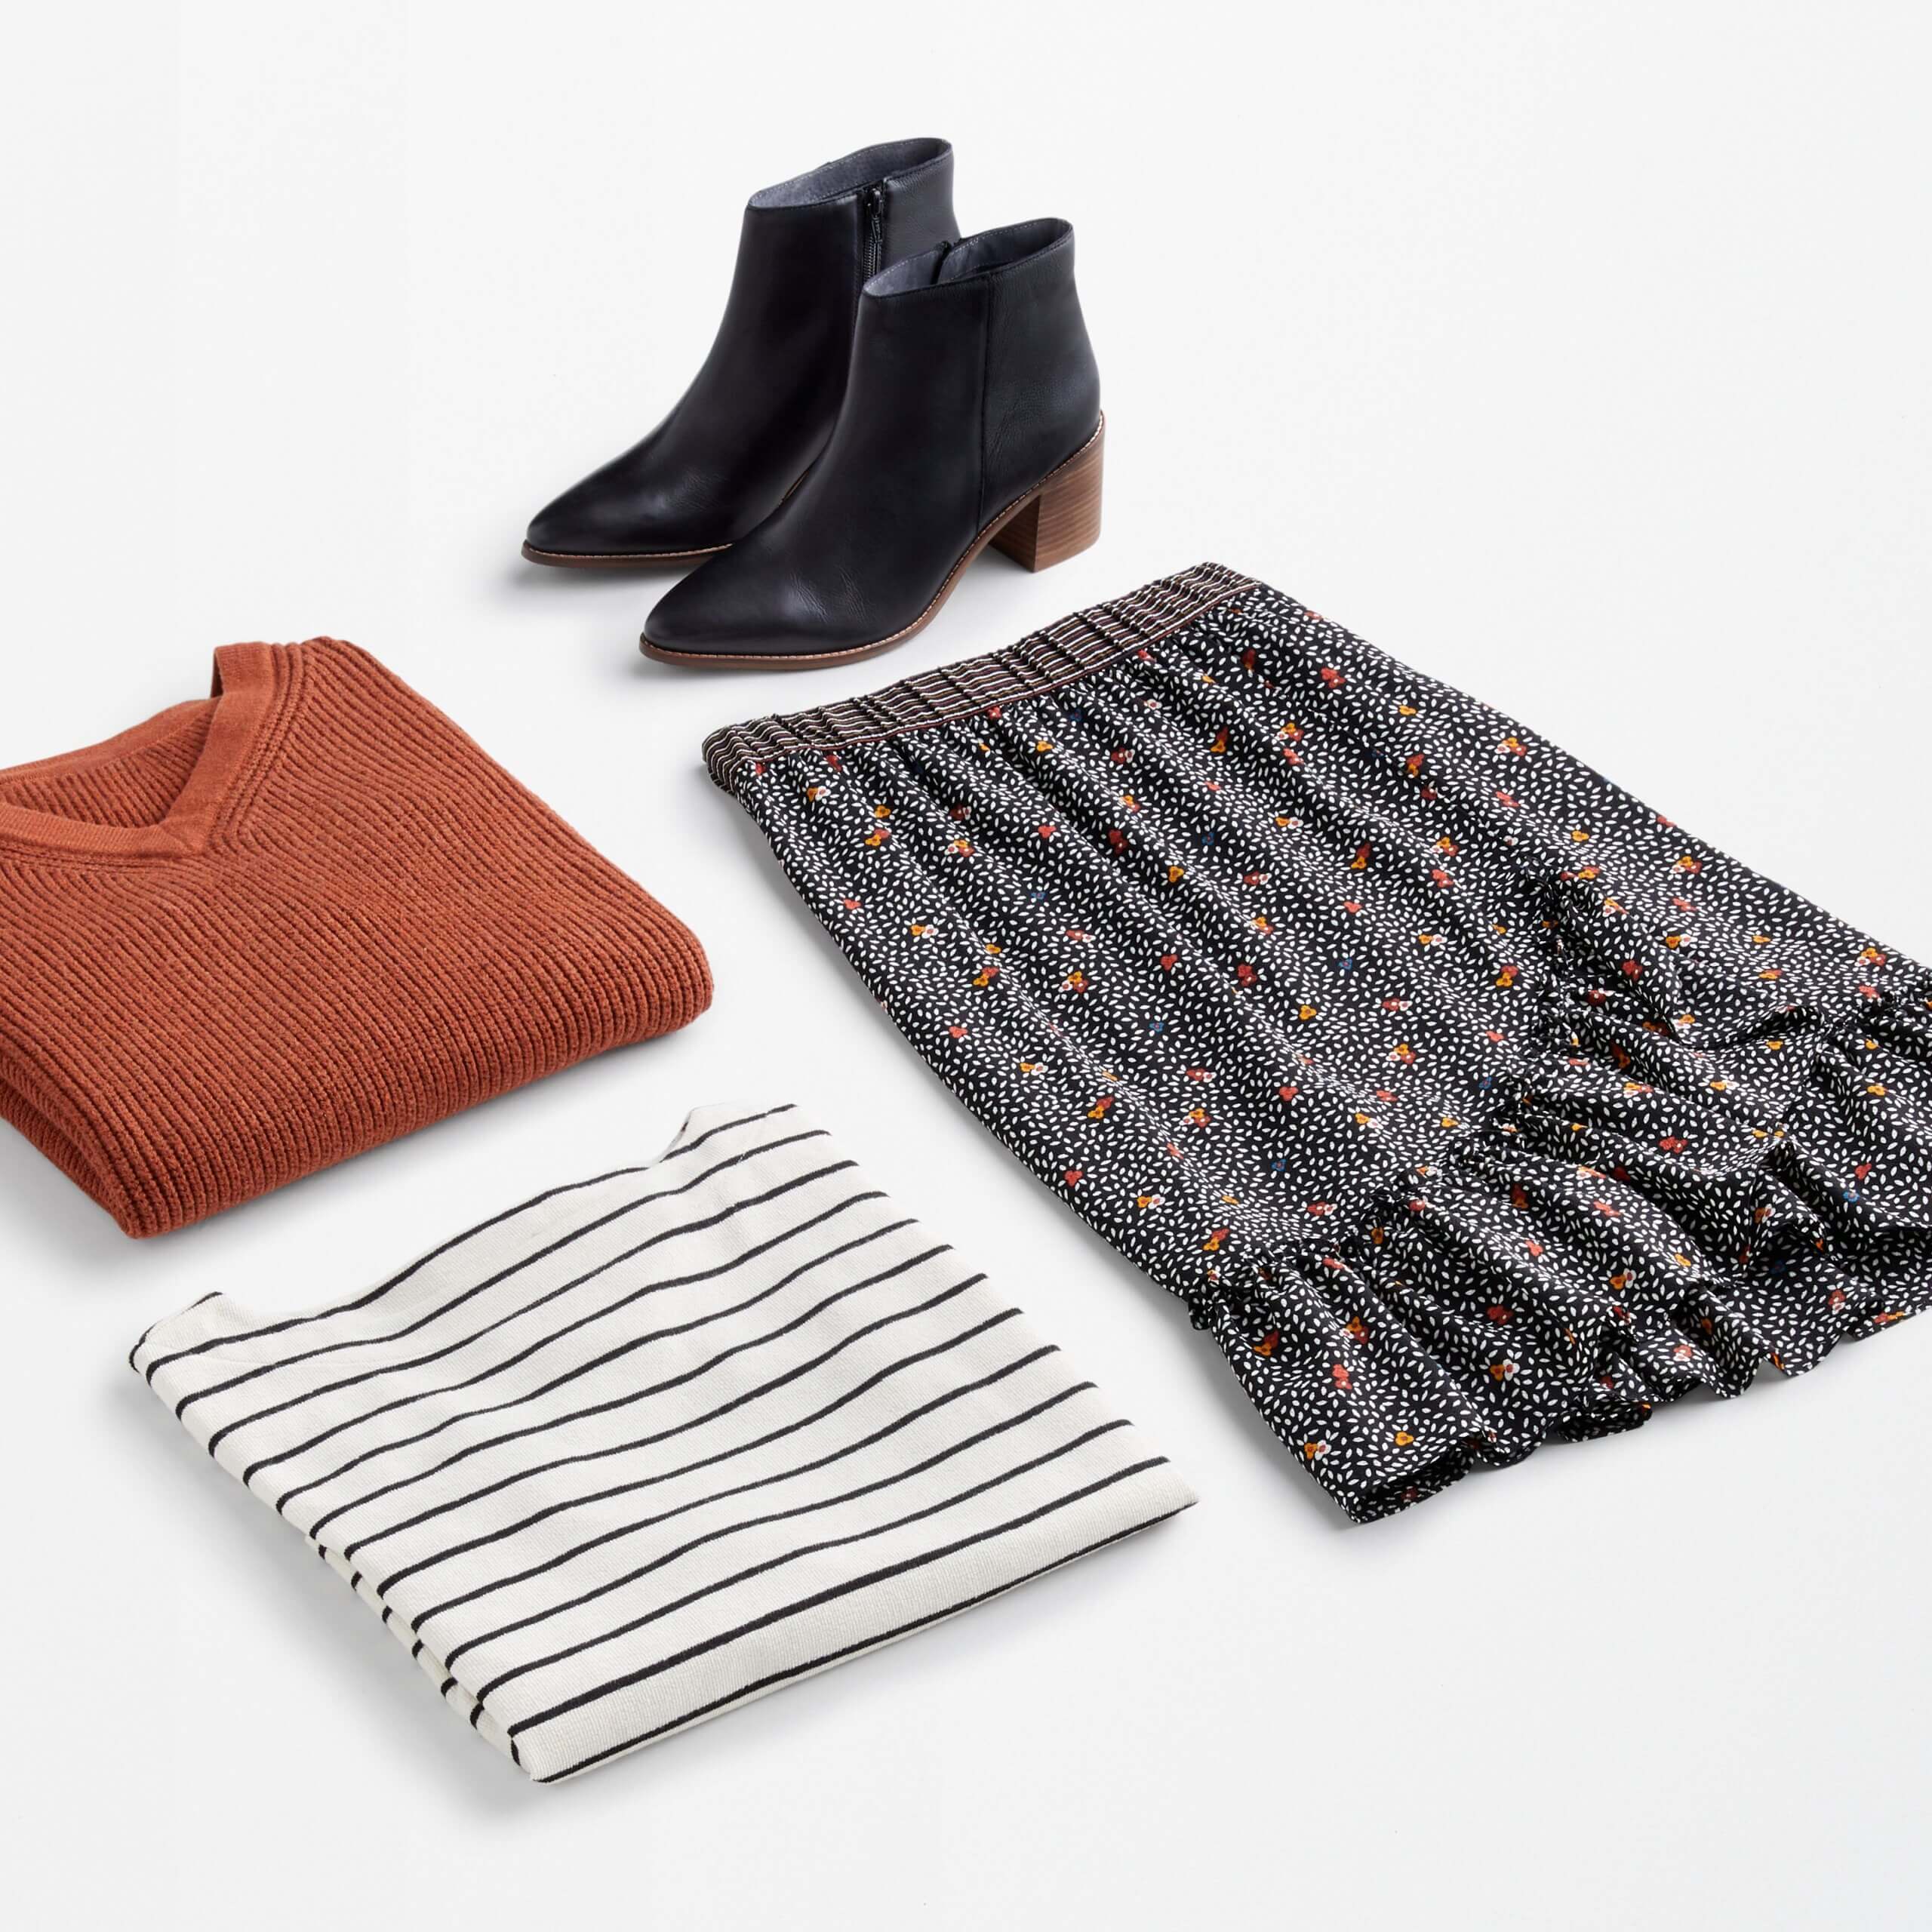 Stitch Fix women’s date night at home featuring floral midi skirt, striped tee, red v-neck sweater and black ankle boots.